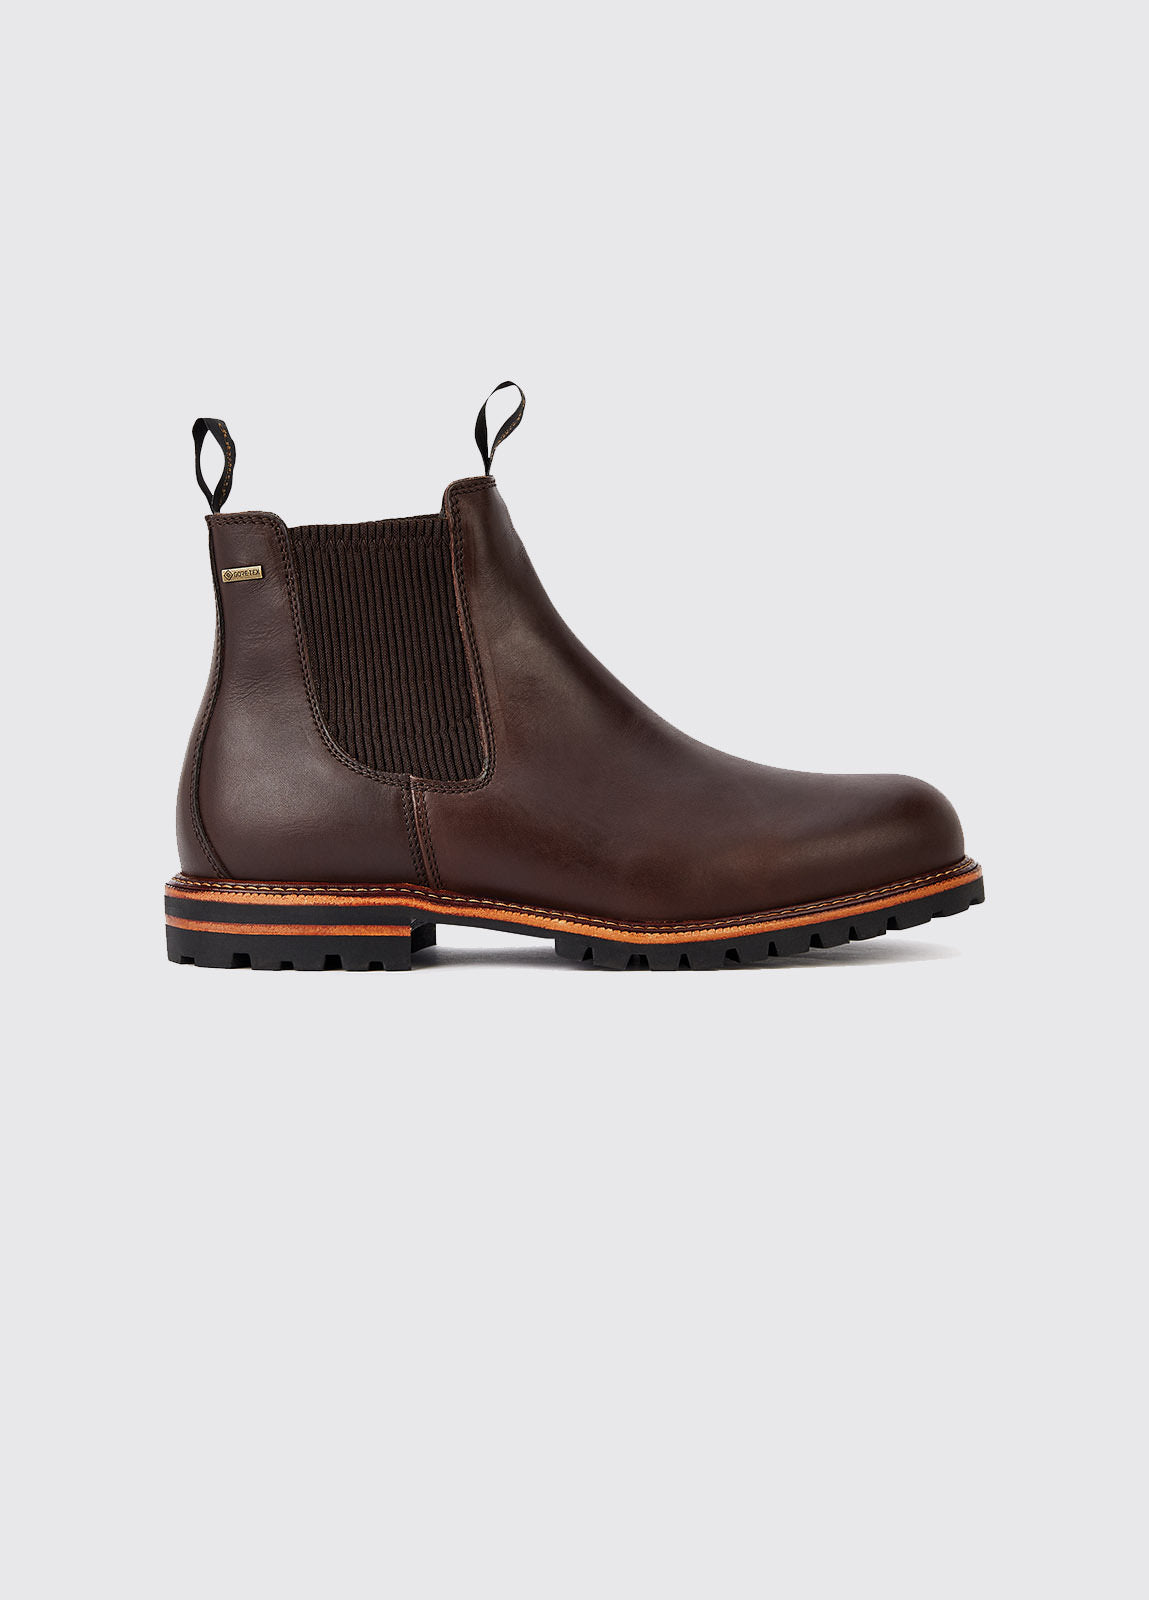 Offaly Ankle Boot - Mahogany